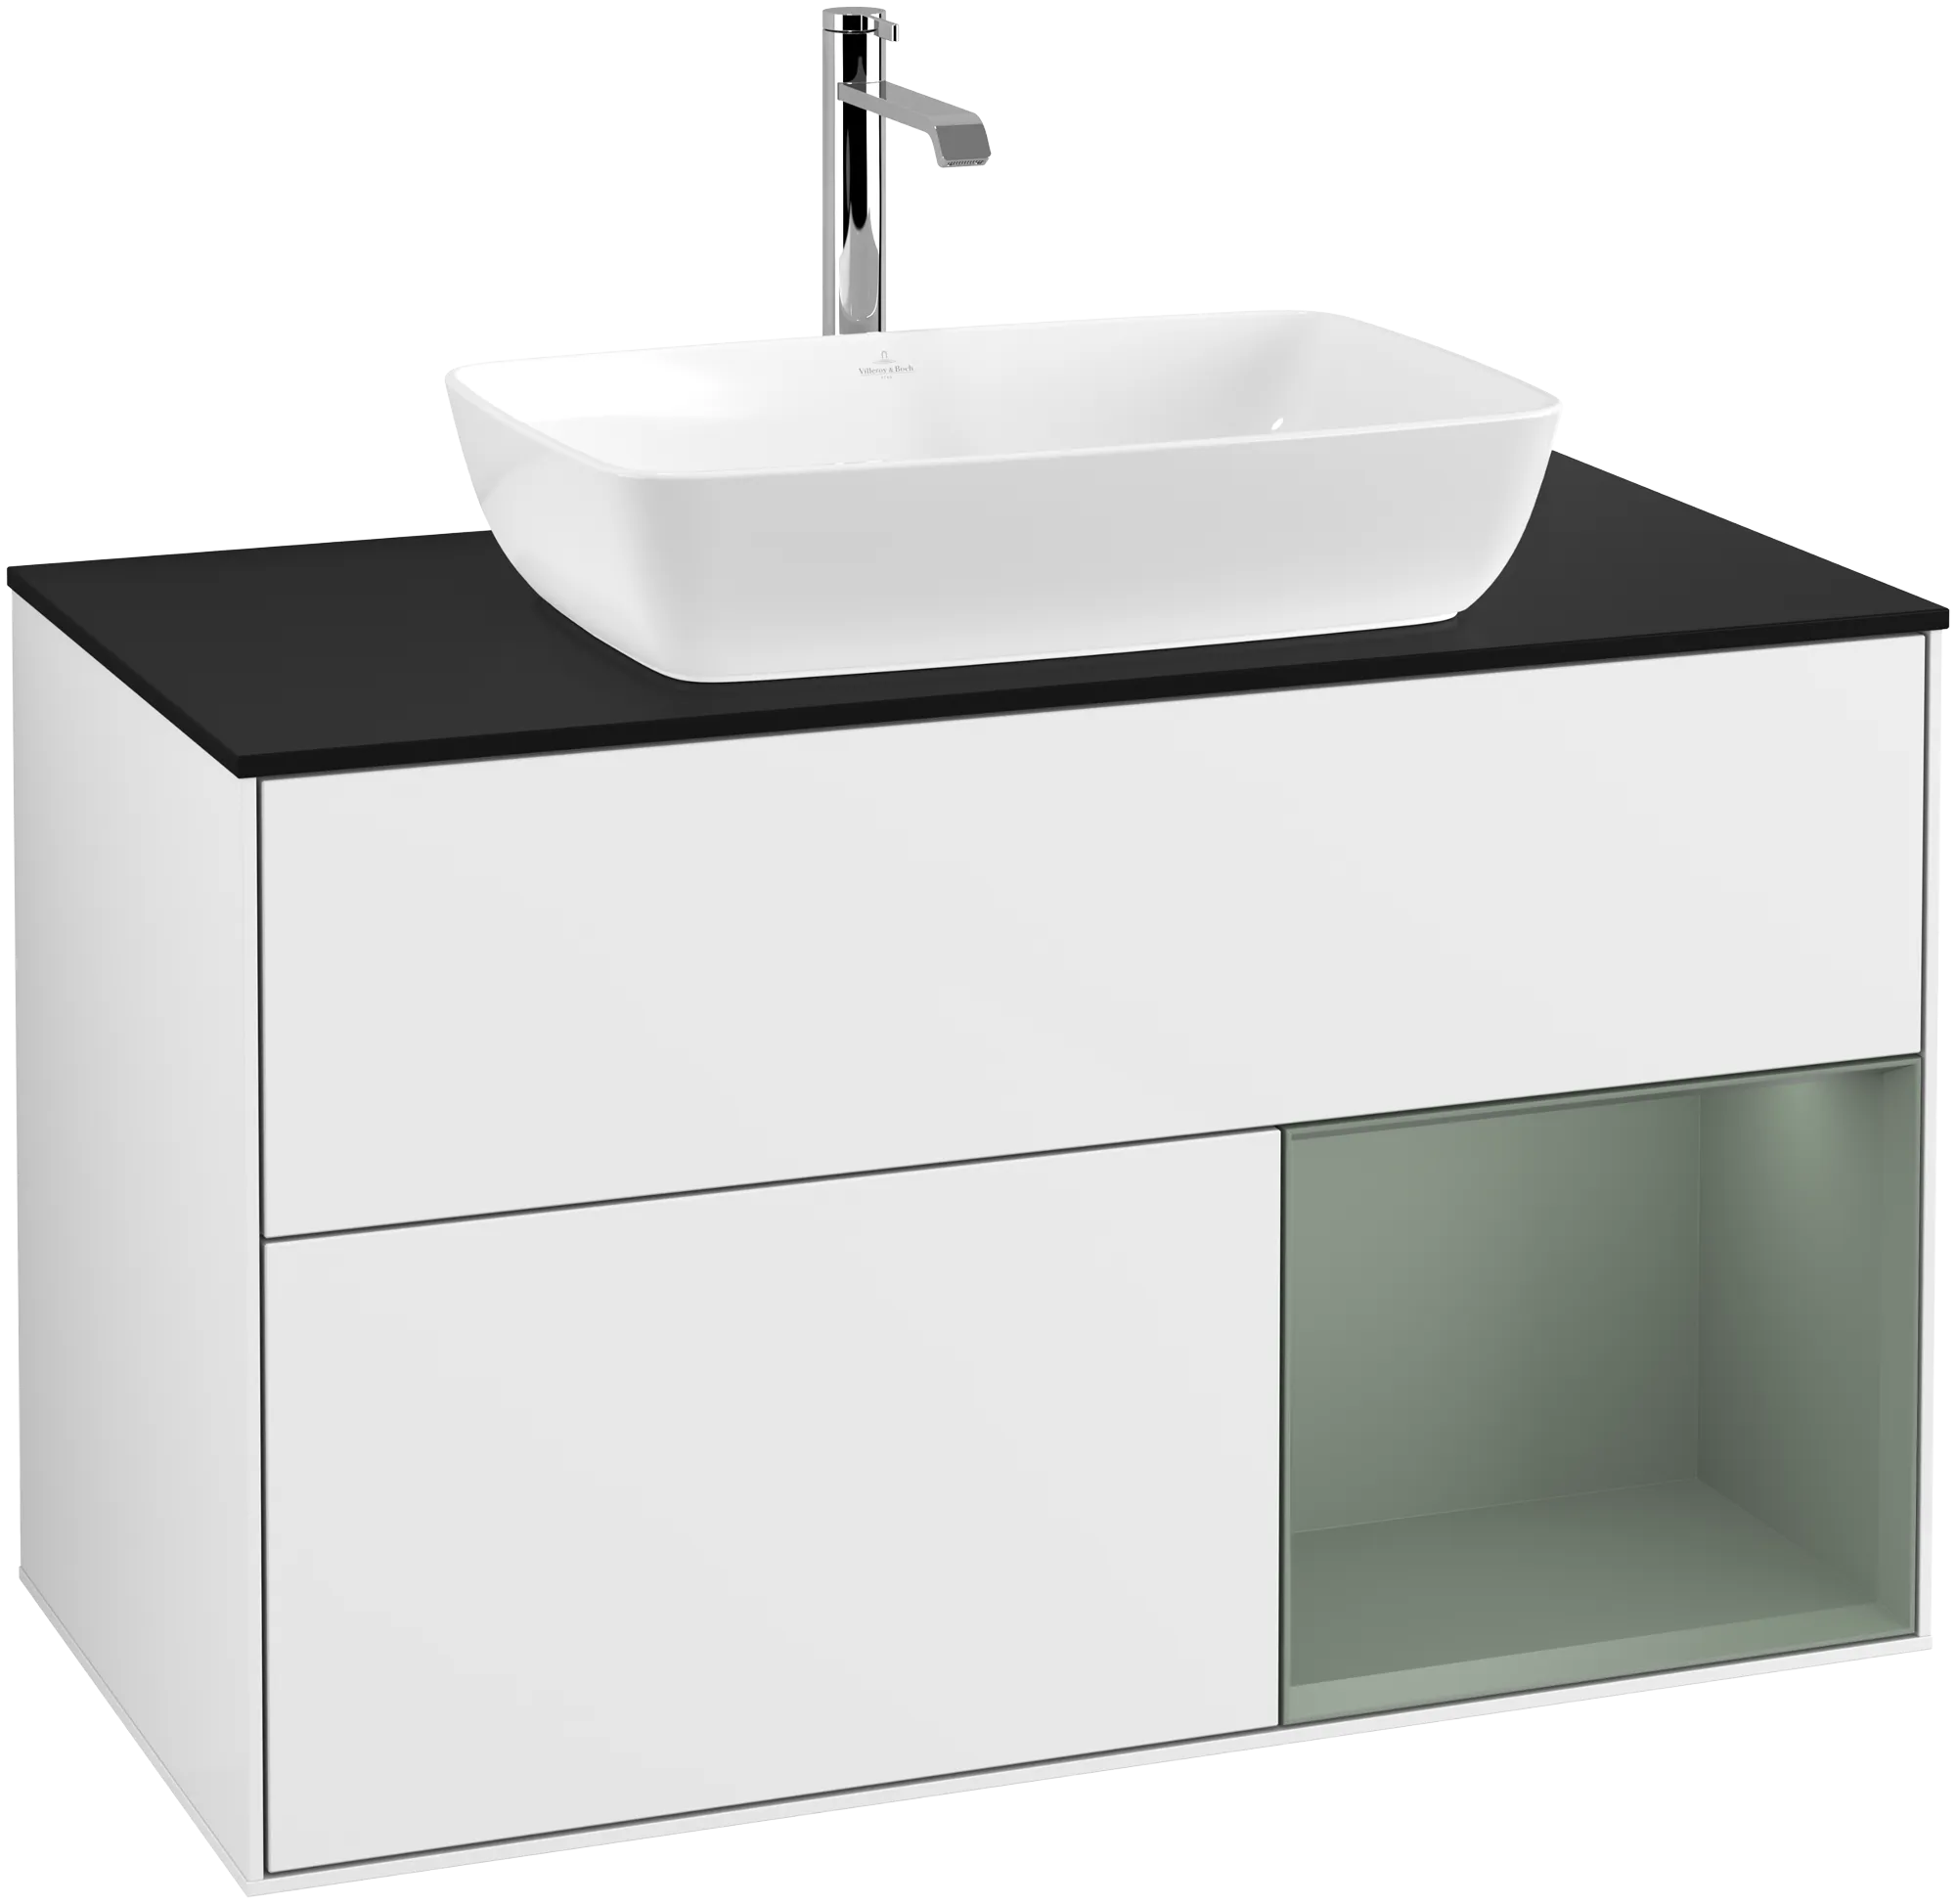 VILLEROY BOCH Finion Vanity unit, with lighting, 2 pull-out compartments, 1000 x 603 x 501 mm, Glossy White Lacquer / Olive Matt Lacquer / Glass Black Matt #G782GMGF resmi